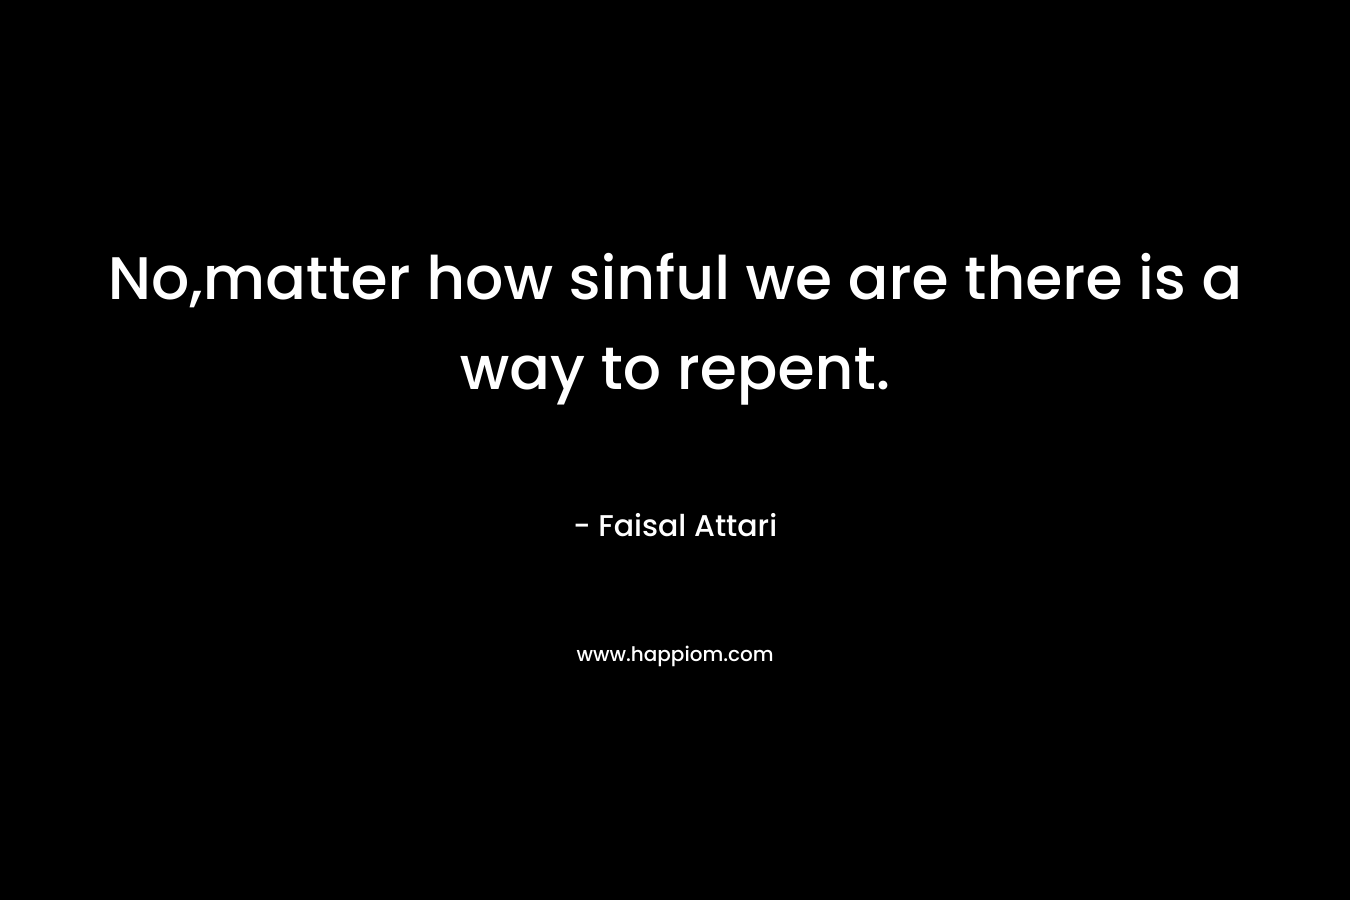 No,matter how sinful we are there is a way to repent. – Faisal Attari